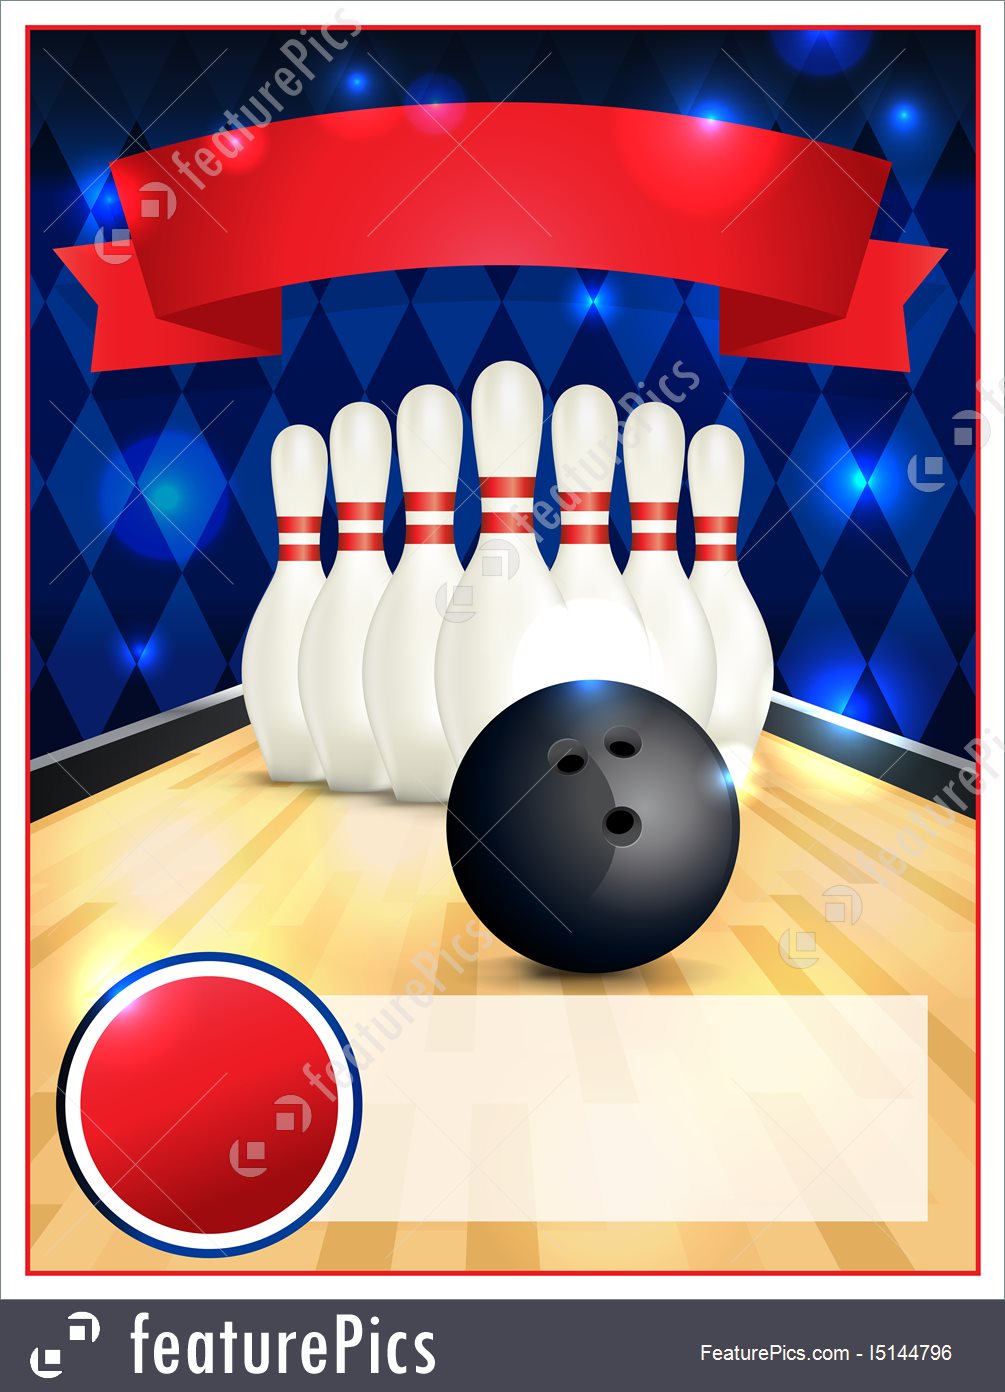 red-pins-bowling-event-flyer-template-doc